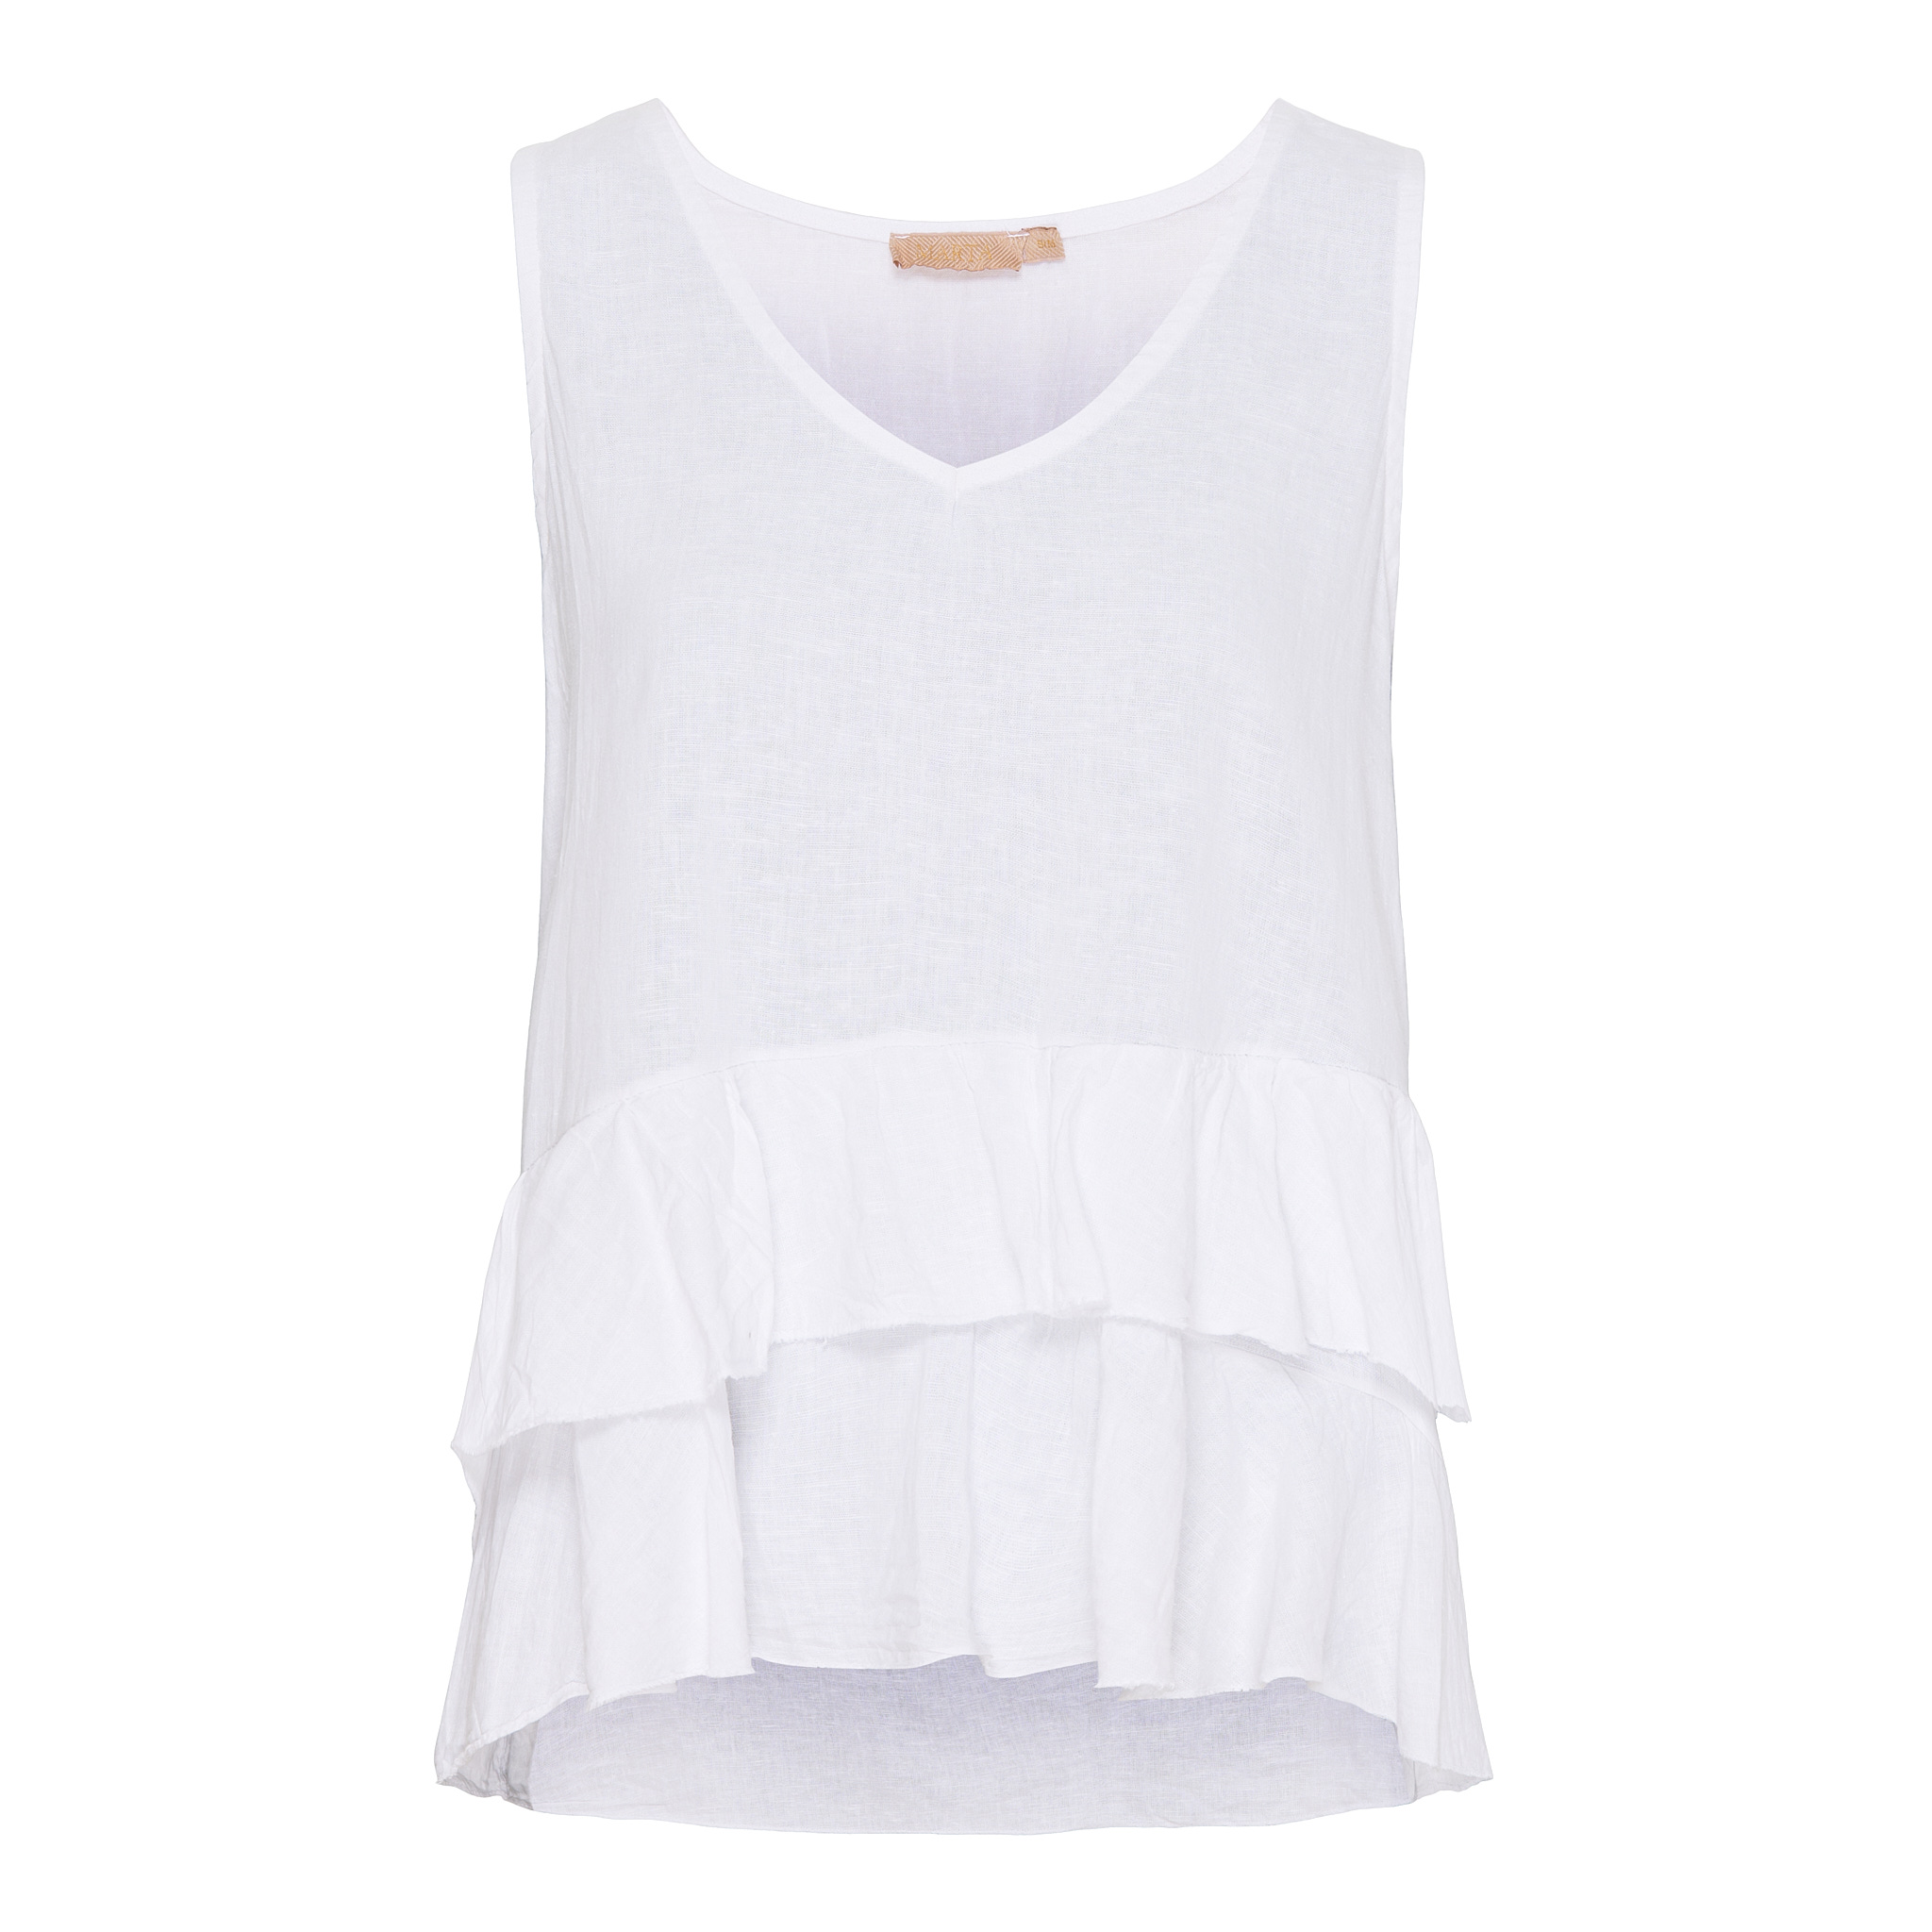 Vicky Frill Top white item